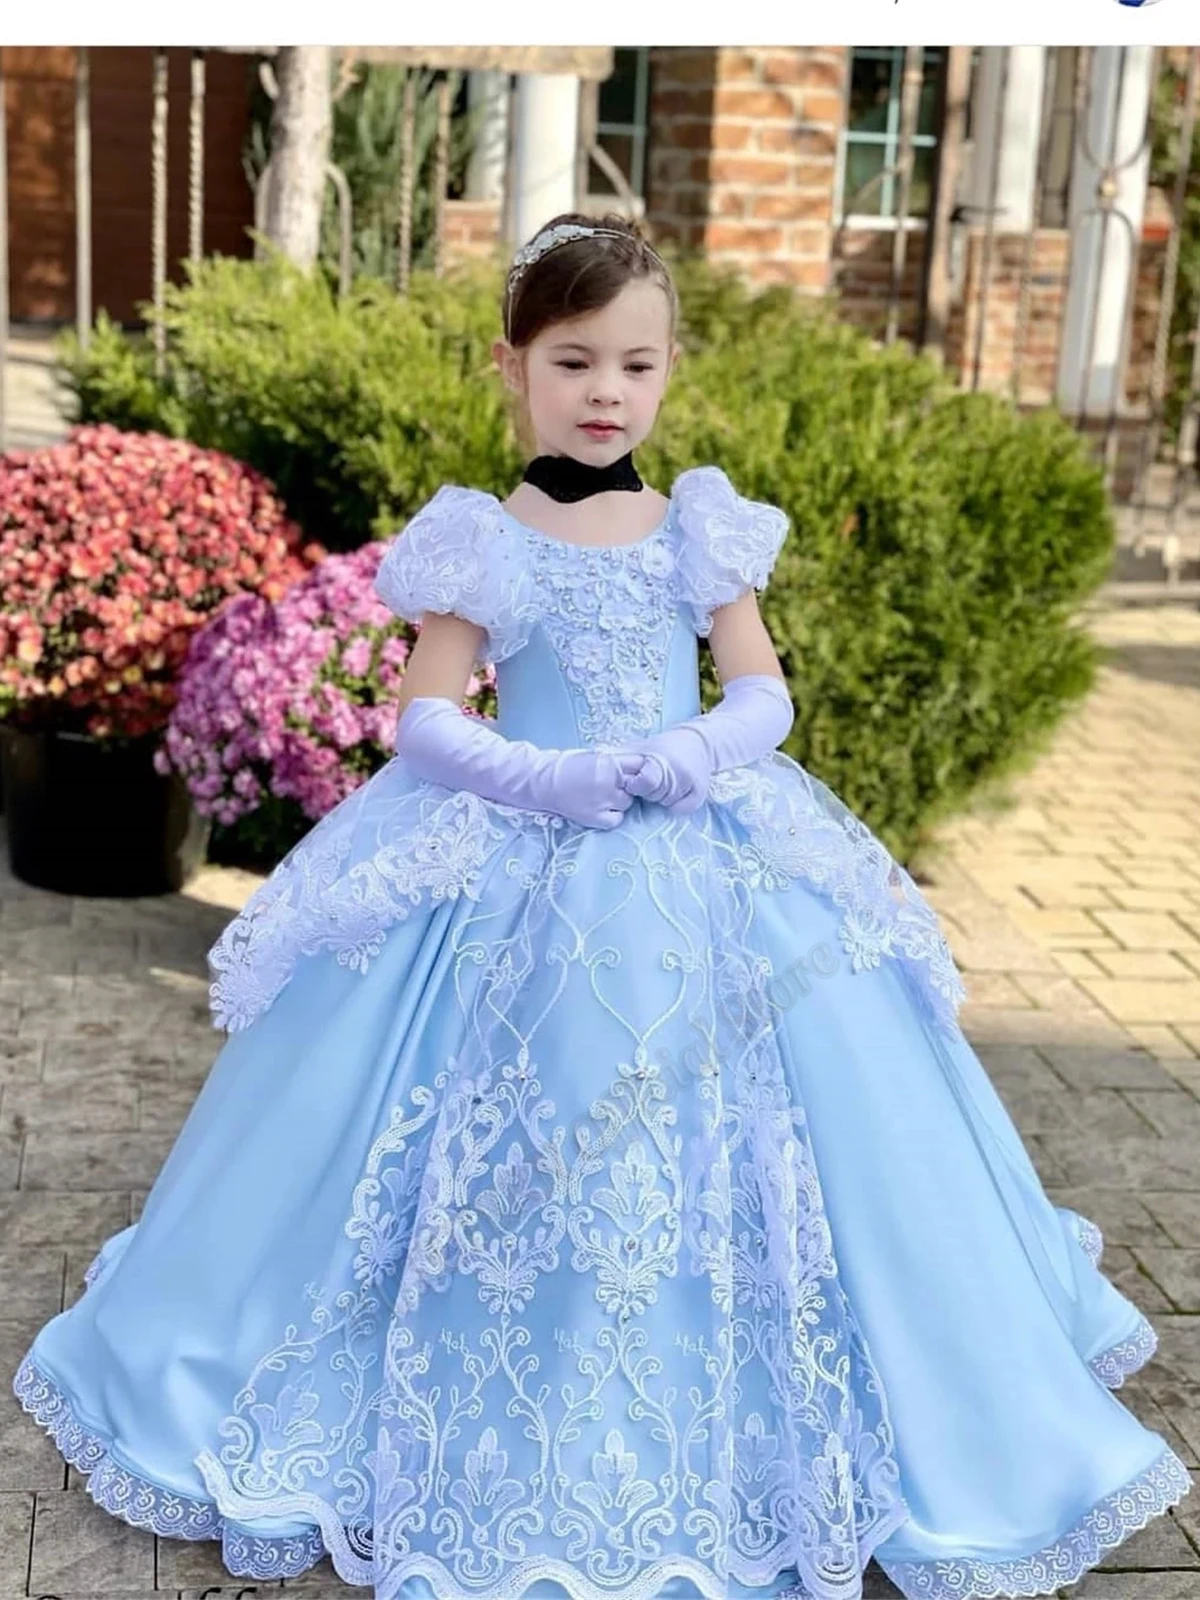 

Light Blue Appliques Pincess Flower Girl Dresses Ball Gown Baby Girls Couture Birthday Wedding Party Dresses Costumes Customised